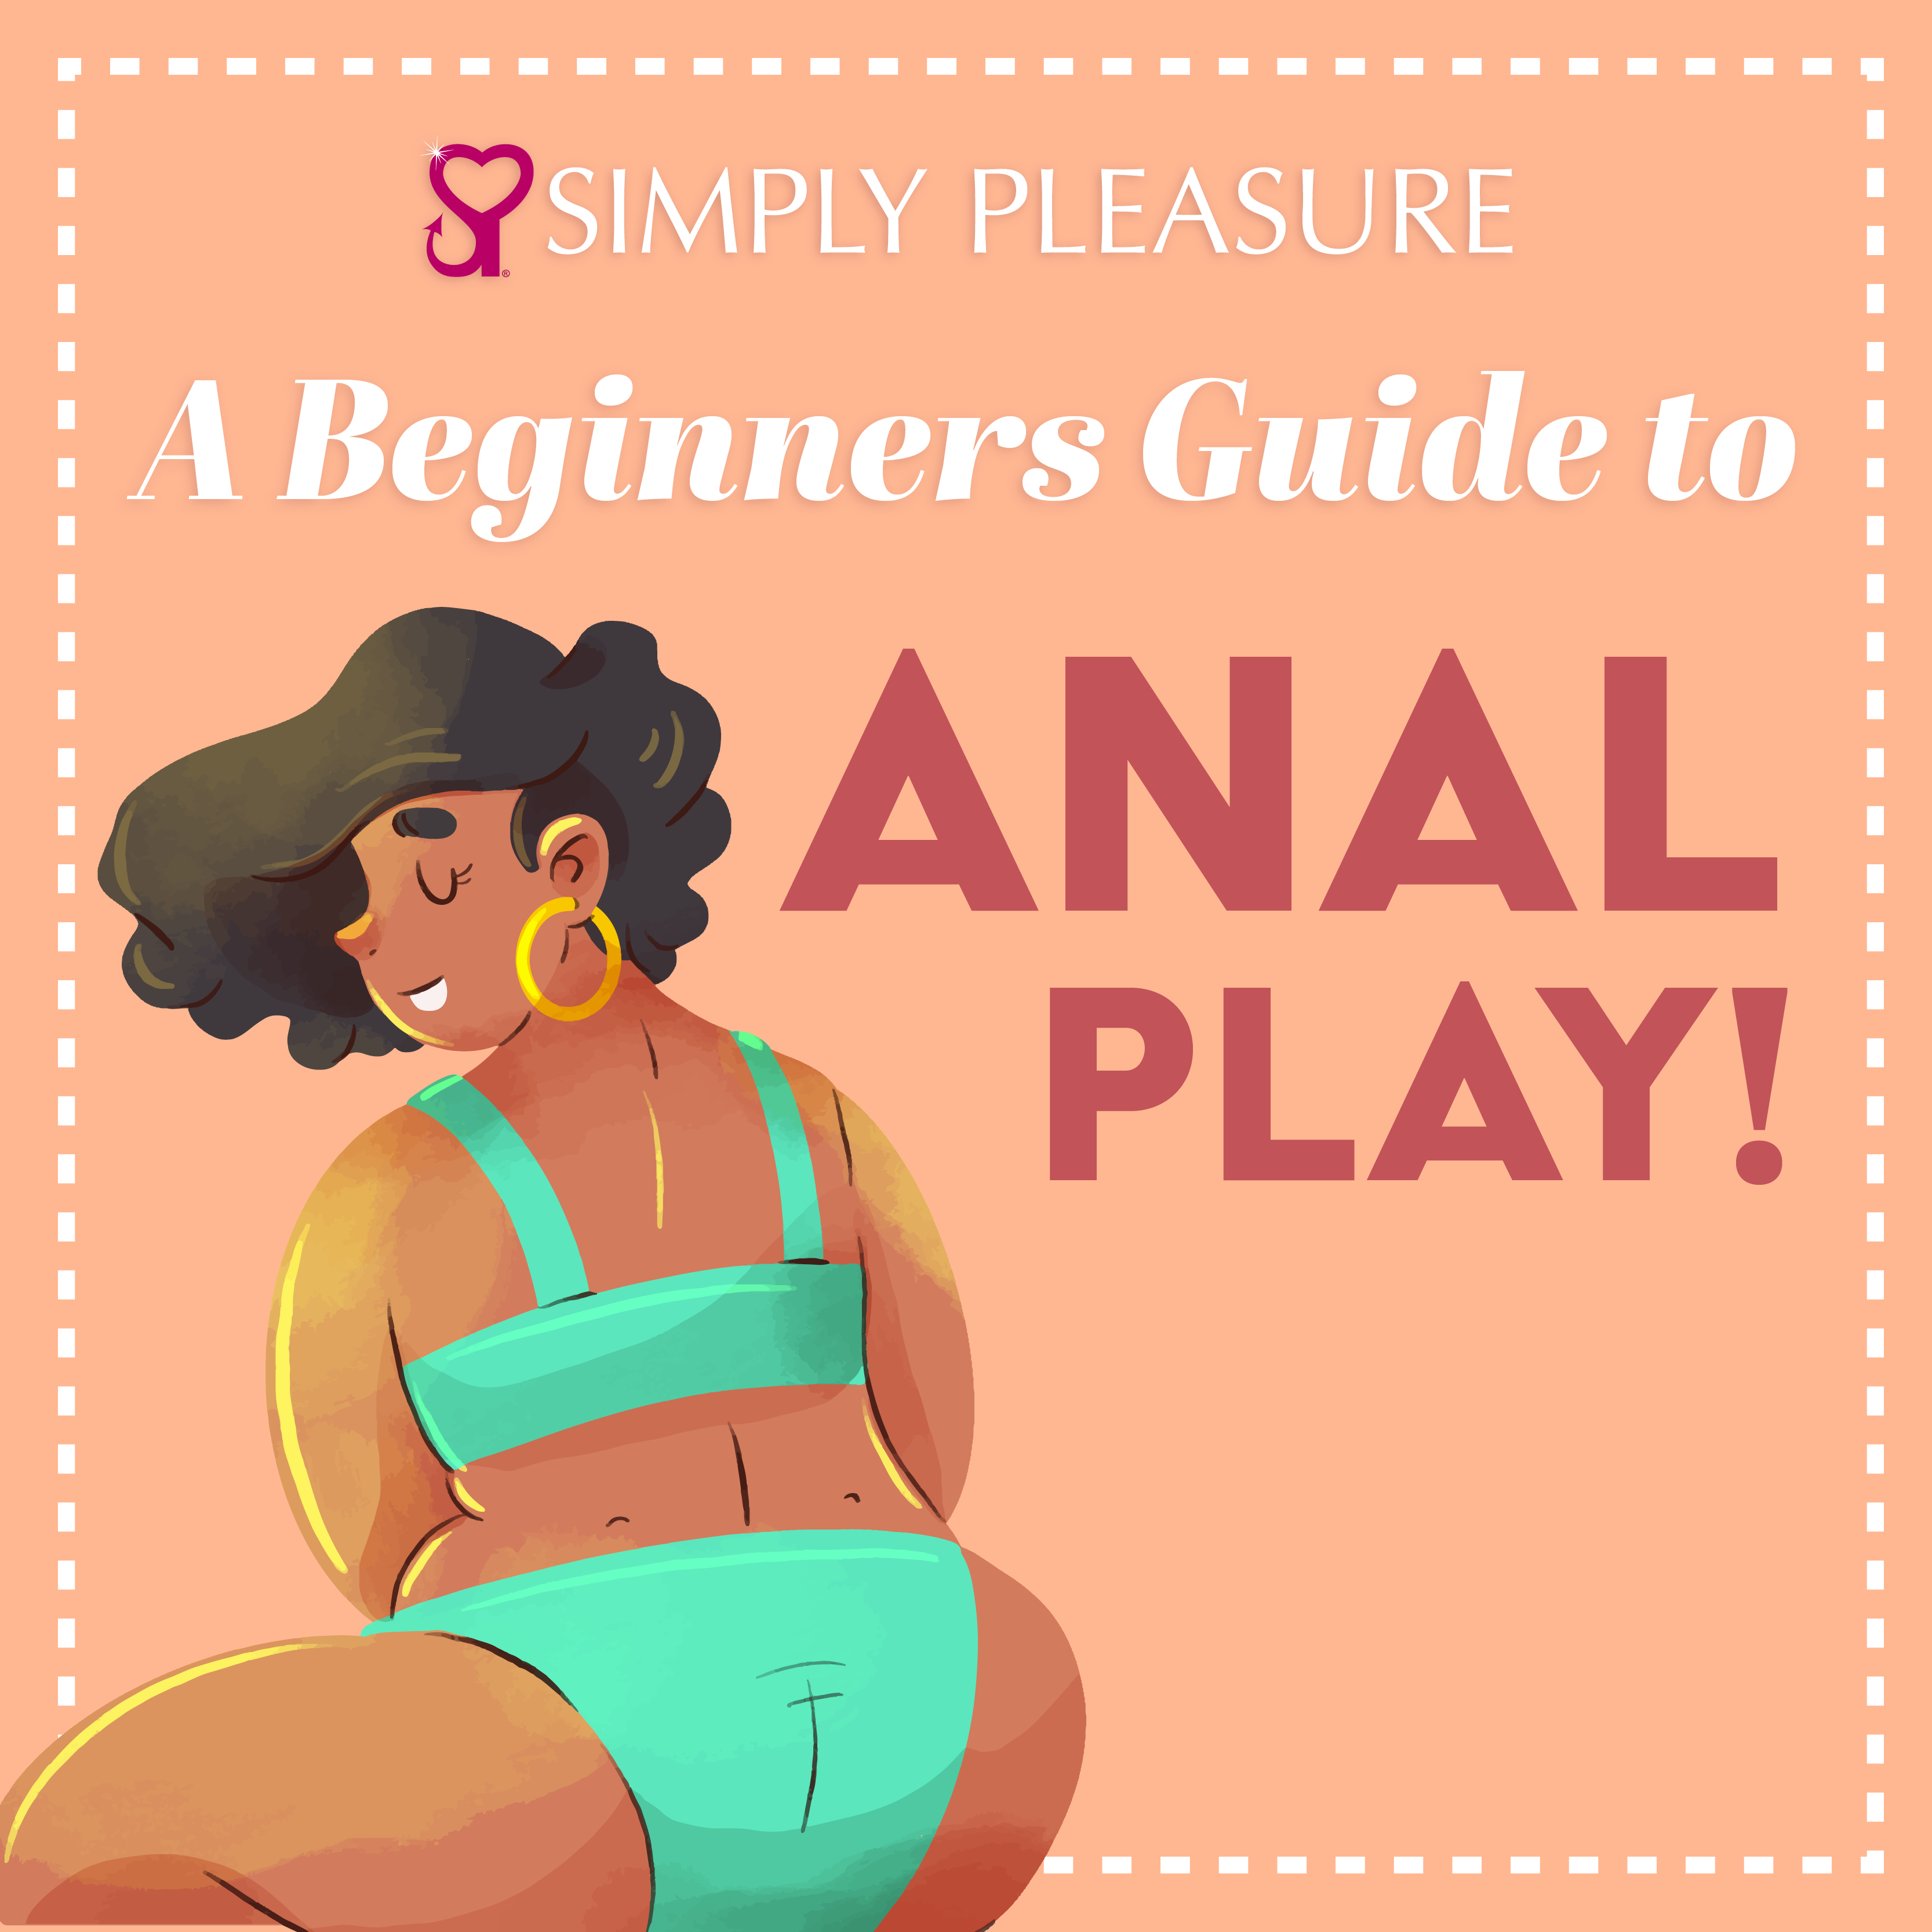 Beginners Guide to Anal Play